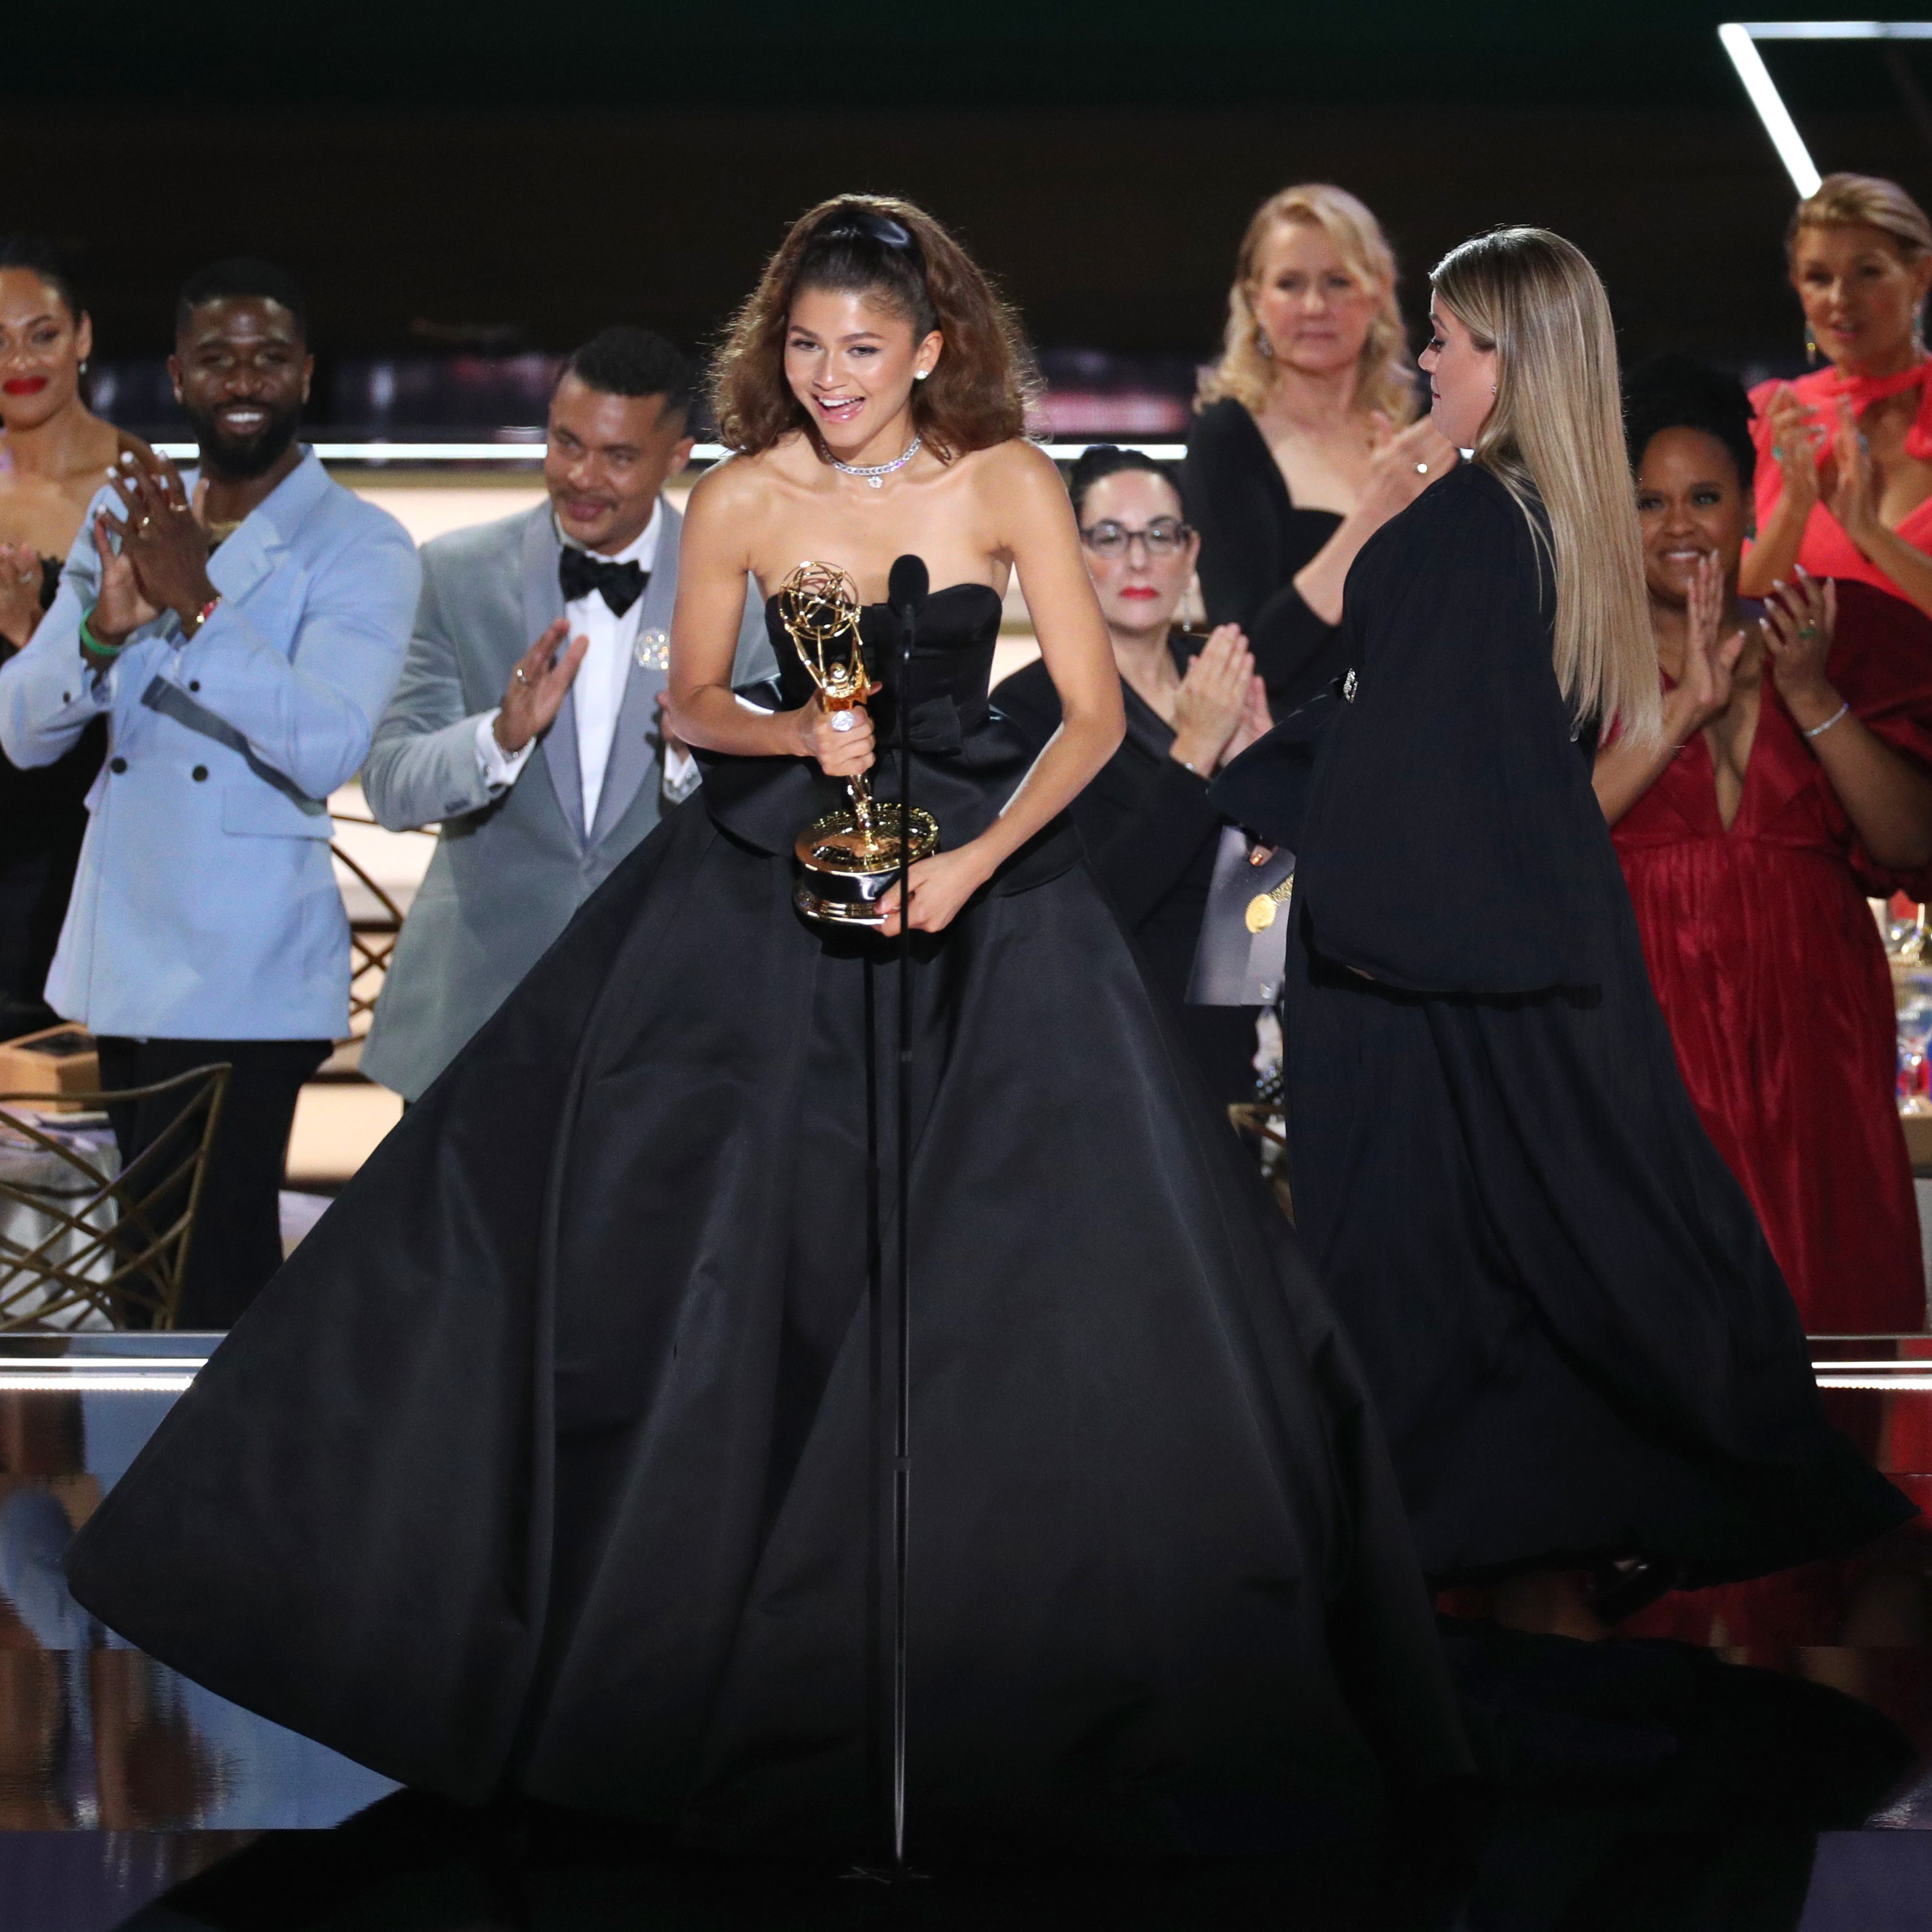 <p>At the <a href="https://www.wonderwall.com/awards-events/fashion-hits-and-misses-from-the-2022-primetime-emmys-649872.gallery?photoId=650015">2022 Emmy Awards</a>, <a href="https://www.wonderwall.com/celebrity/profiles/overview/zendaya-1555.article">Zendaya</a> took home <a href="https://www.wonderwall.com/awards-events/emmys/emmys-2022-most-talked-about-moments-trending-water-cooler-highlights-speeches-winners-trends649893.gallery?photoId=650499">the prize for outstanding lead actress in a drama series</a> for her work on "Euphoria," making her, at 26, the youngest two-time acting winner in Emmy history (<a href="https://www.wonderwall.com/awards-events/emmys/whats-buzzing-at-the-2020-primetime-emmy-awards-moments-had-everyone-talking-trending-stories-385136.gallery?photoId=385440">she won the same award in 2020</a>) and the first Black woman to twice win the Emmy for best lead actress in a drama series! </p>